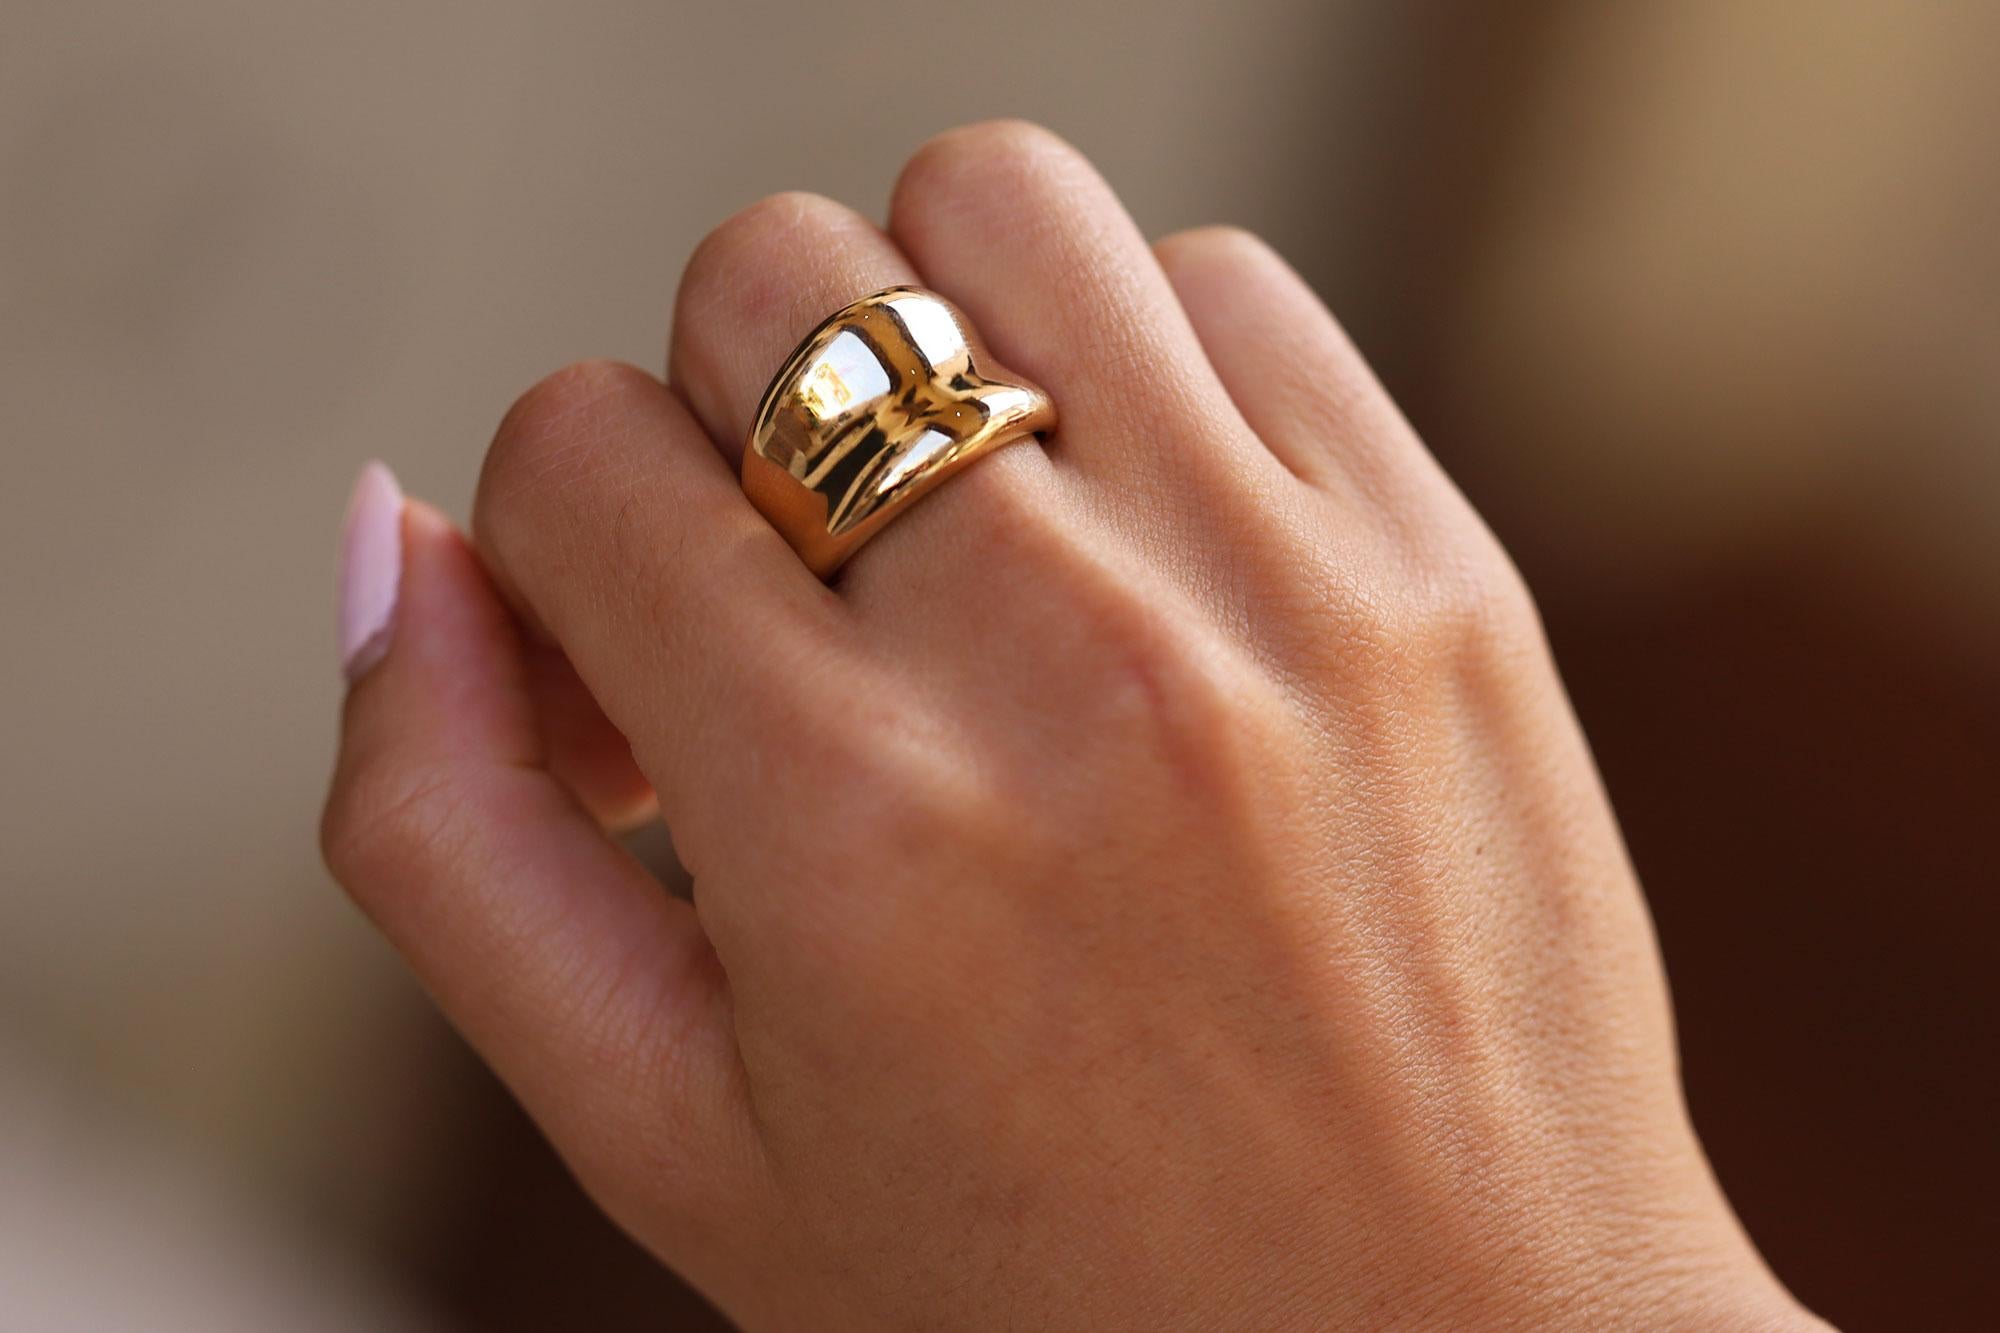 This vintage 14k gold cocktail ring offers a unique blend of contemporary style and classy luxury. Sustainably hand crafted of 14k yellow gold offering prominent finger coverage along with a unique, free-form design. Channel the current Mob Wife